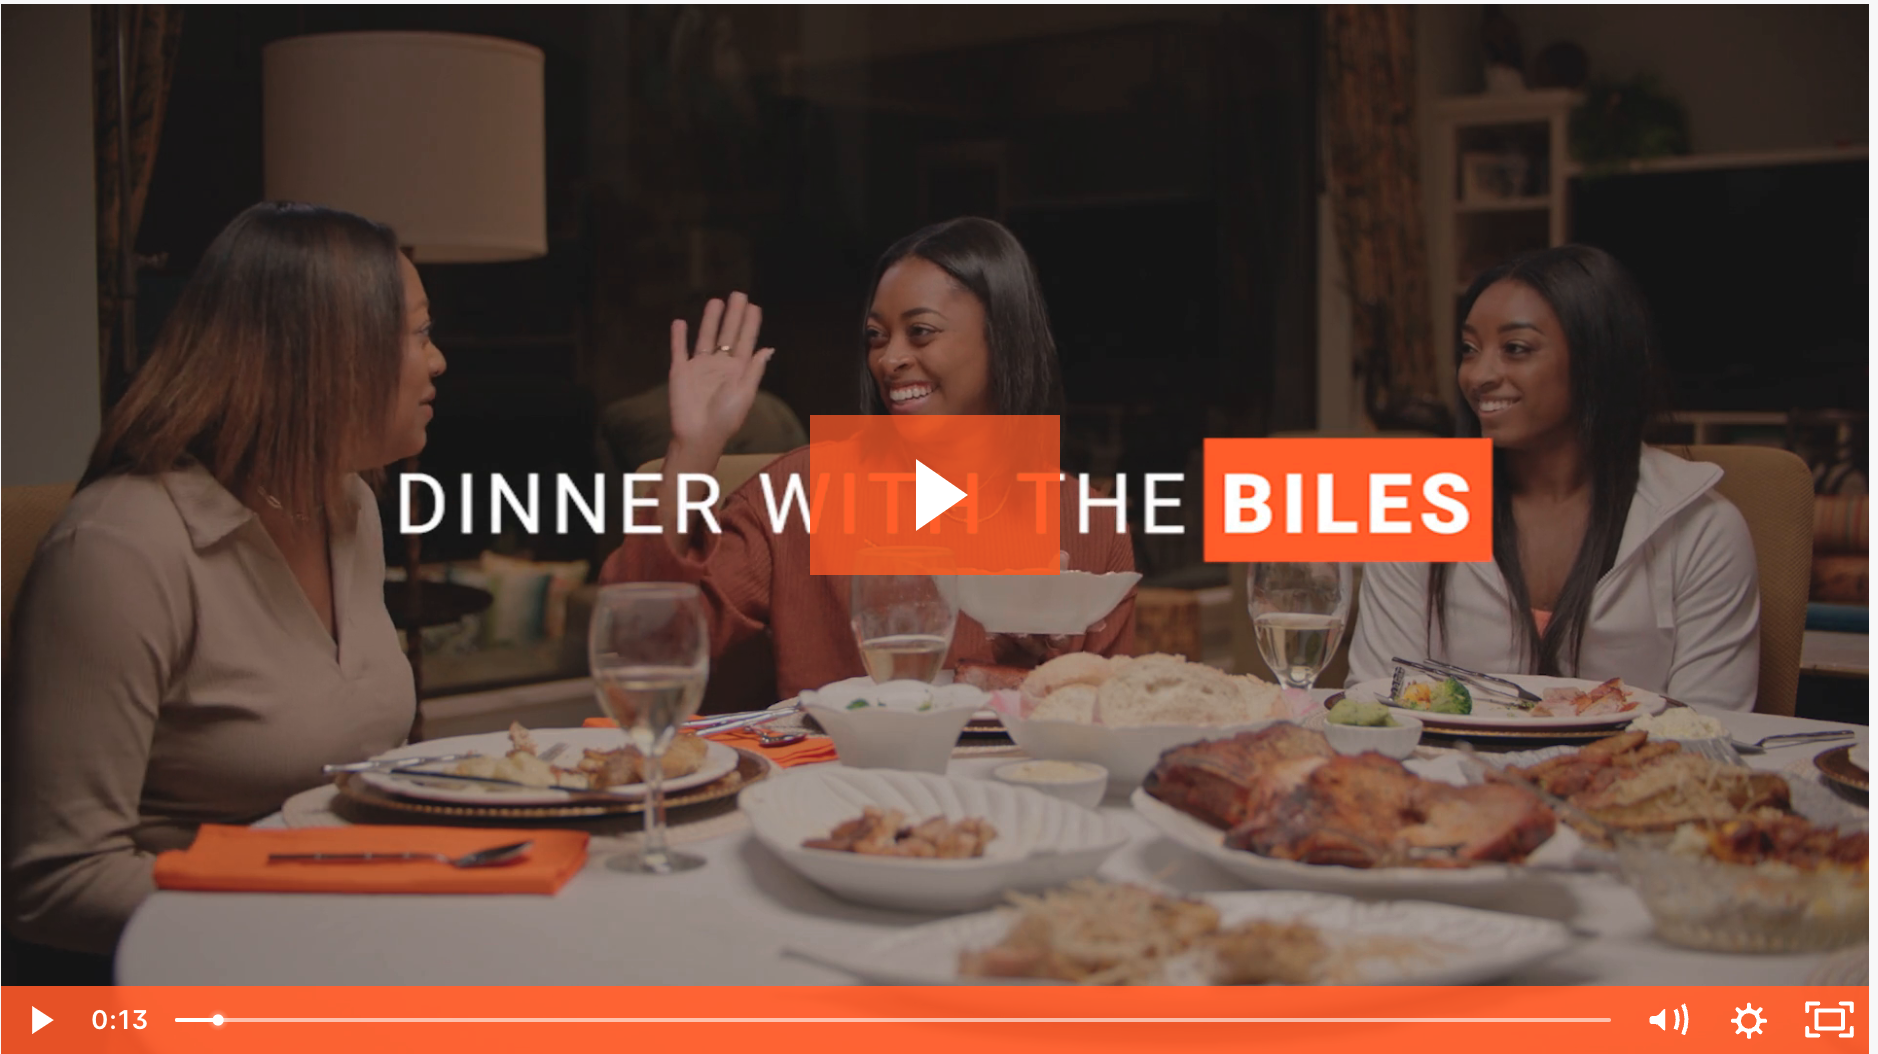 Dinner with the Biles